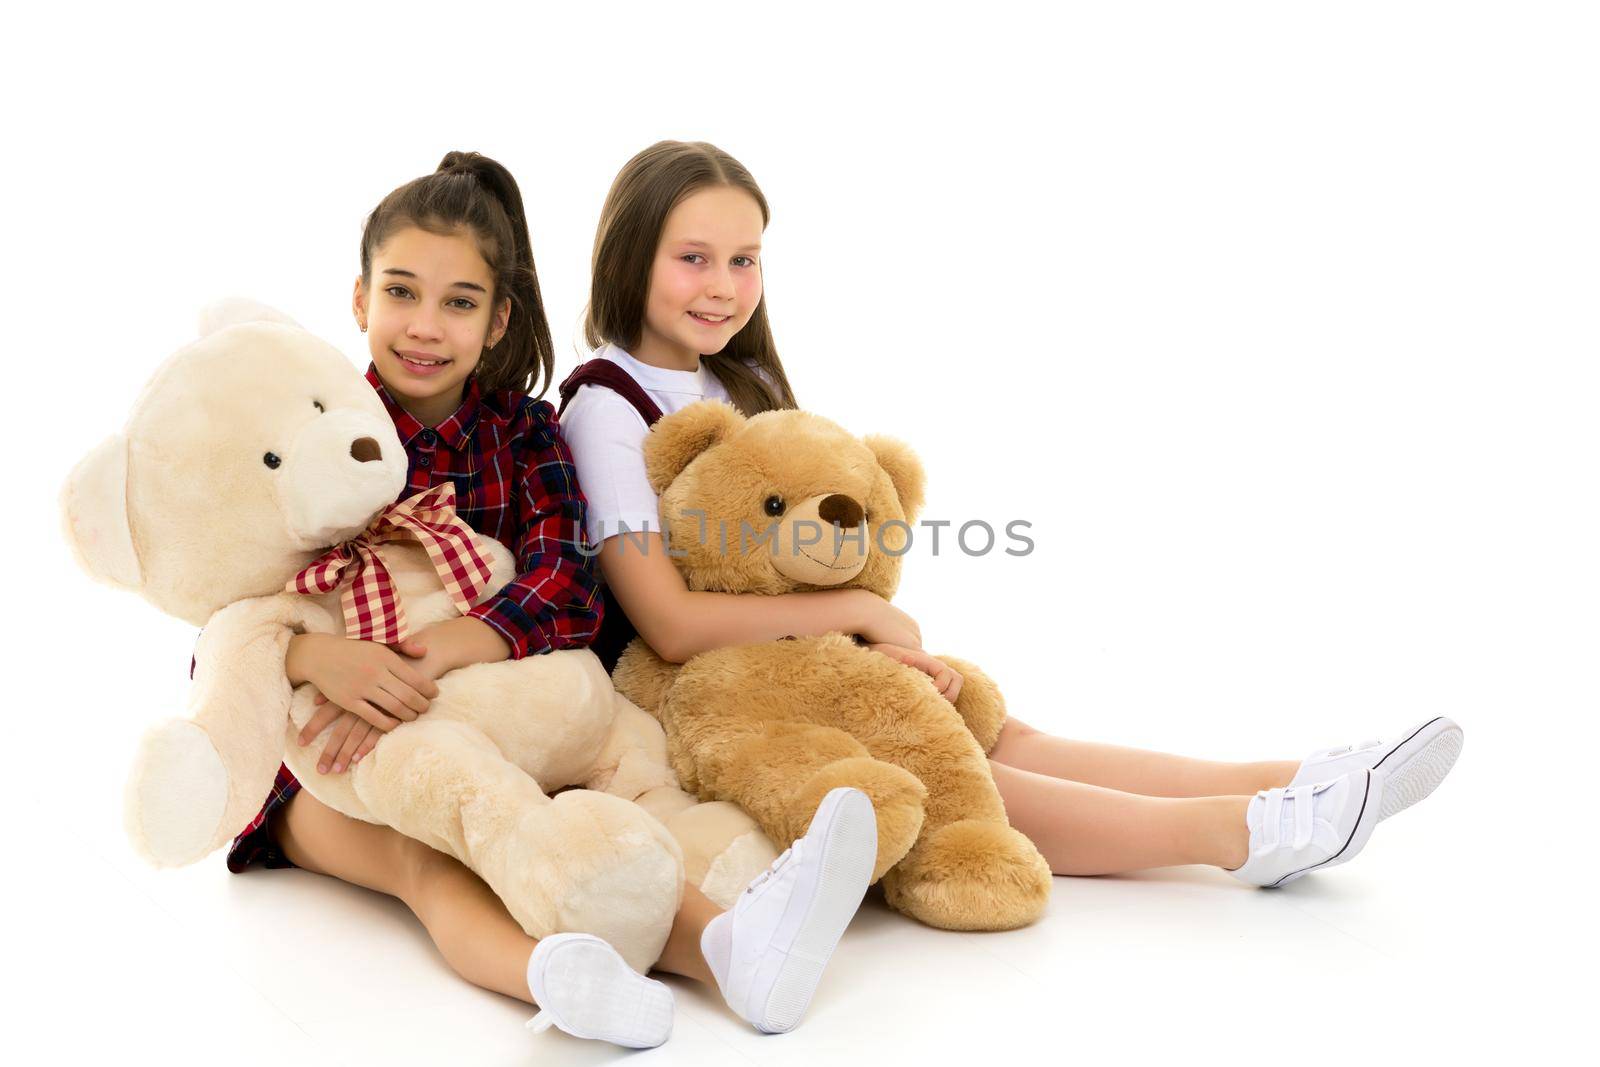 Little girl with toy. Two beautiful happy girls standing and embracing plushs toy in children room. Tenderness and beauty concept. Girls holds heap of teddy bears. Girl hugging teddybears, childhood.